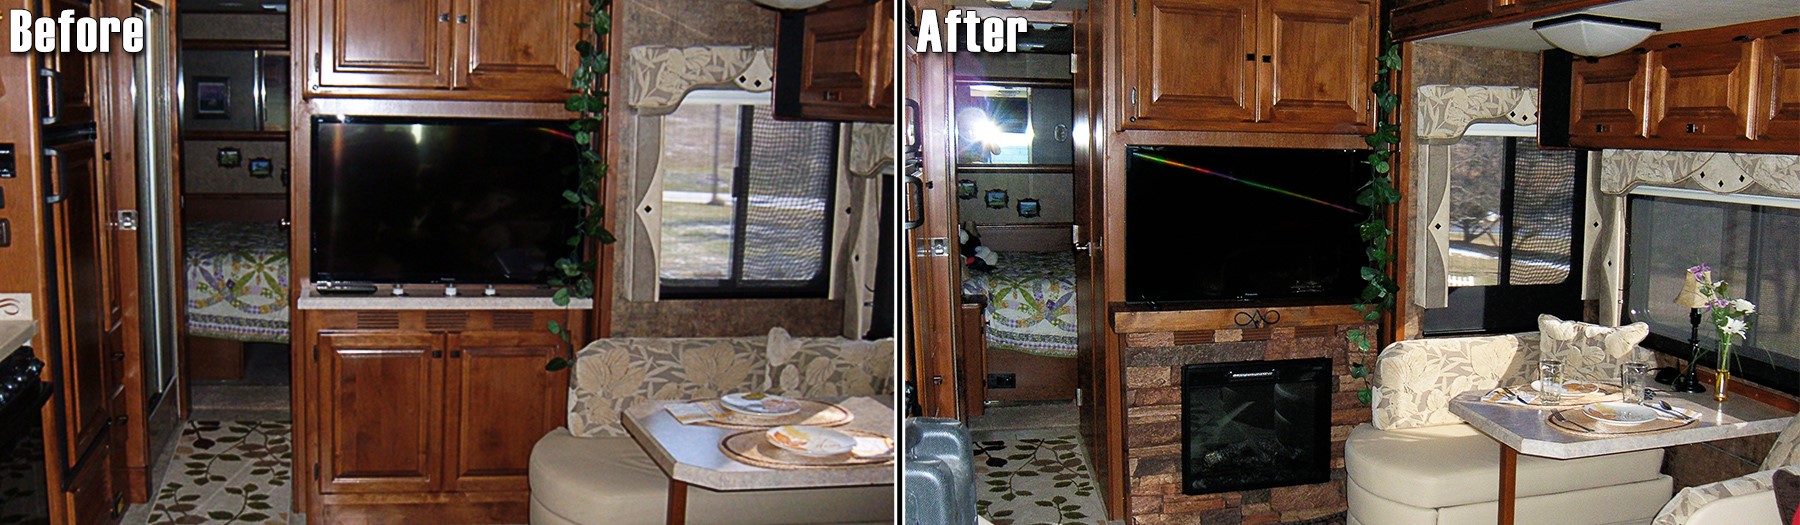 Before and after photo of a recreational vehicle's fireplace remodeled with faux panels.